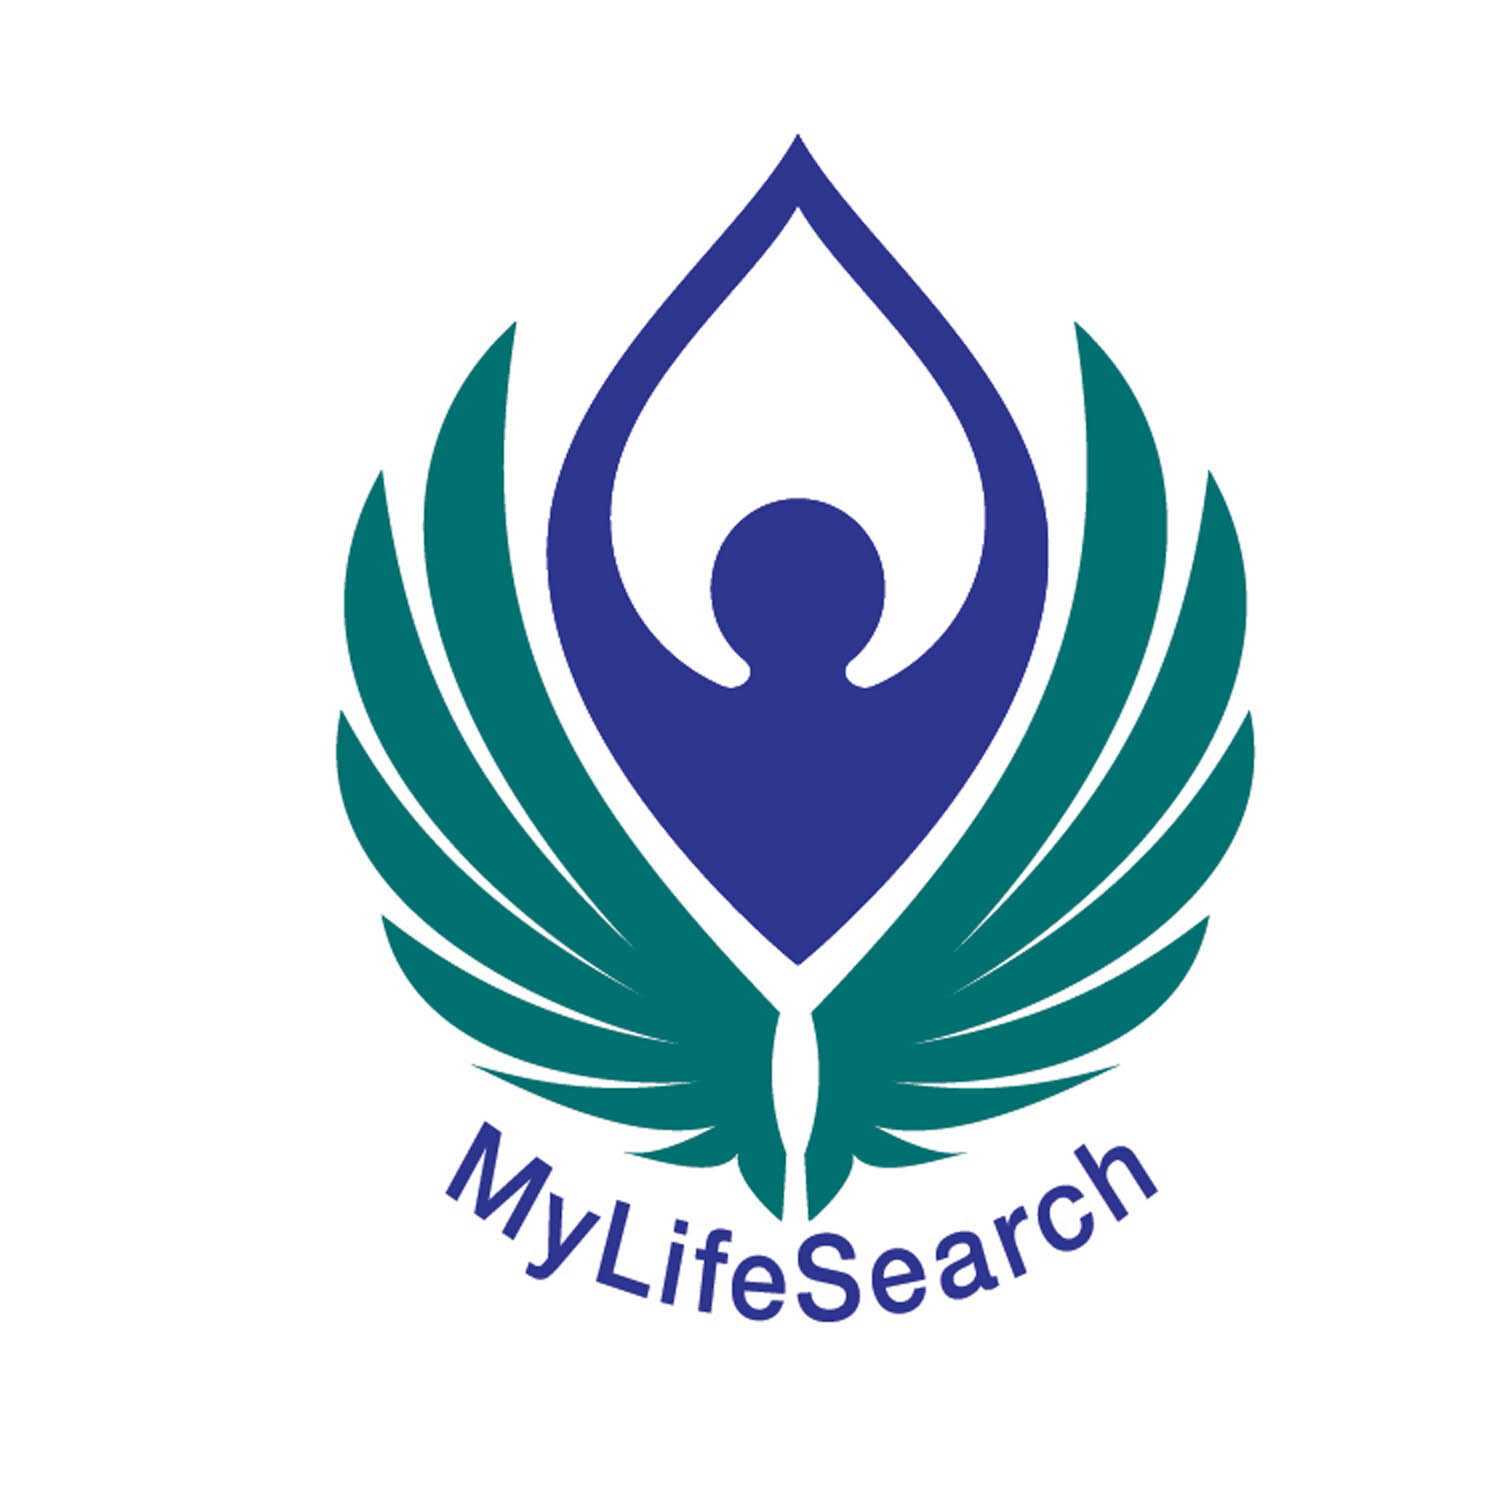 MyLifeSearch